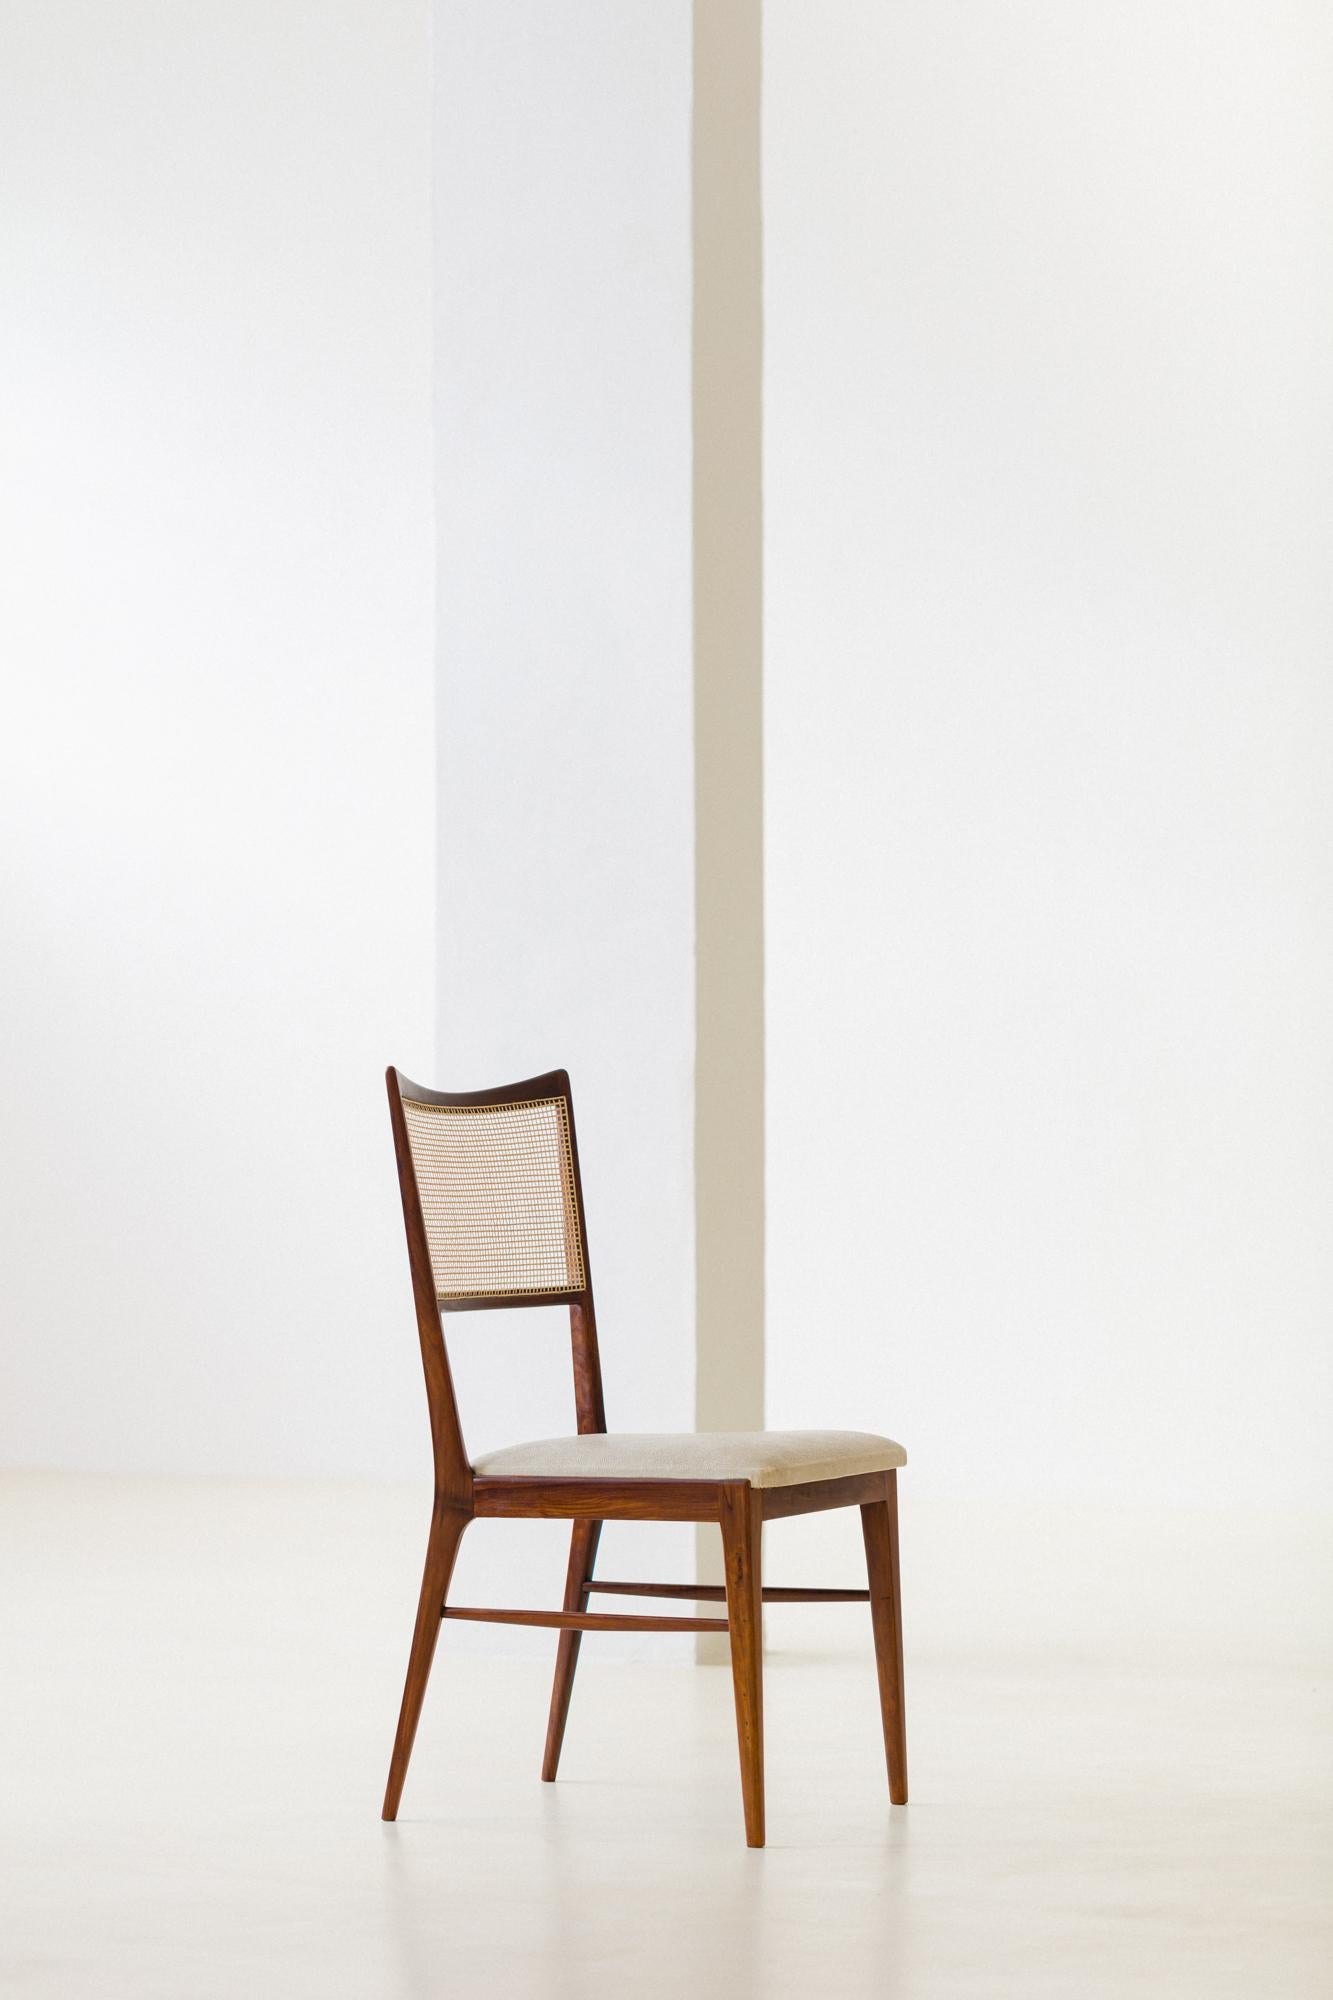 Brazilian Set of 10 Rosewood and Cane Dining Chairs, Unknown Designer, 1950s For Sale